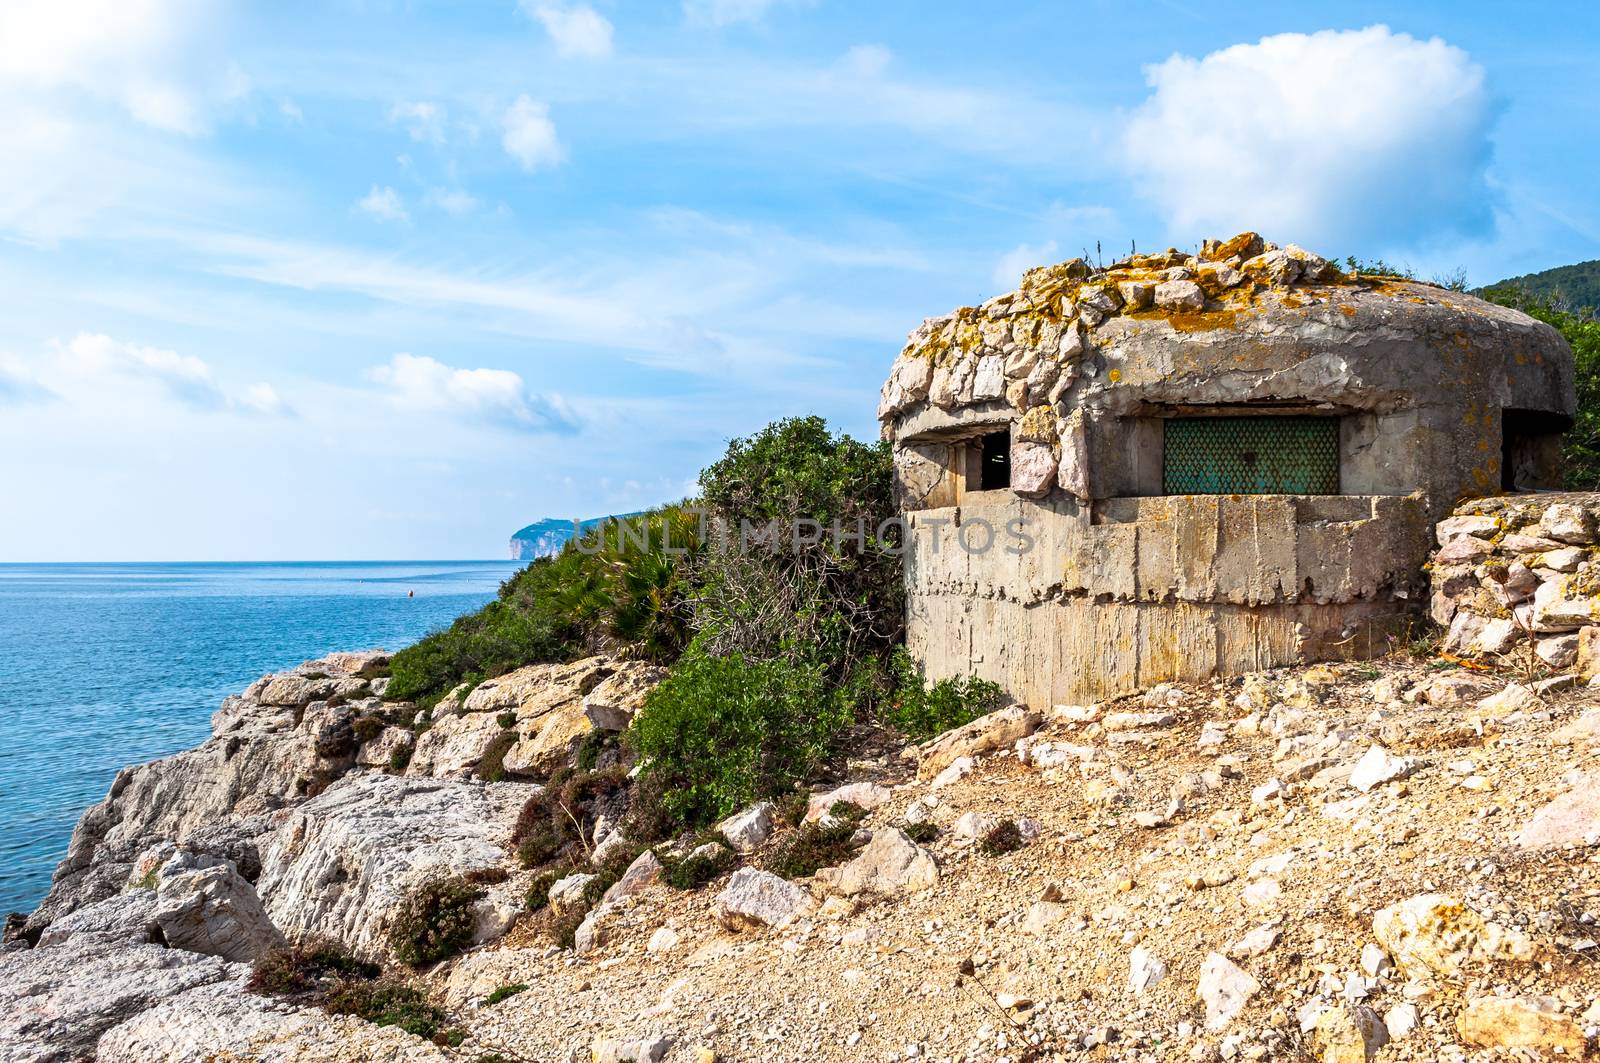 World war two bunker on the coast by replica